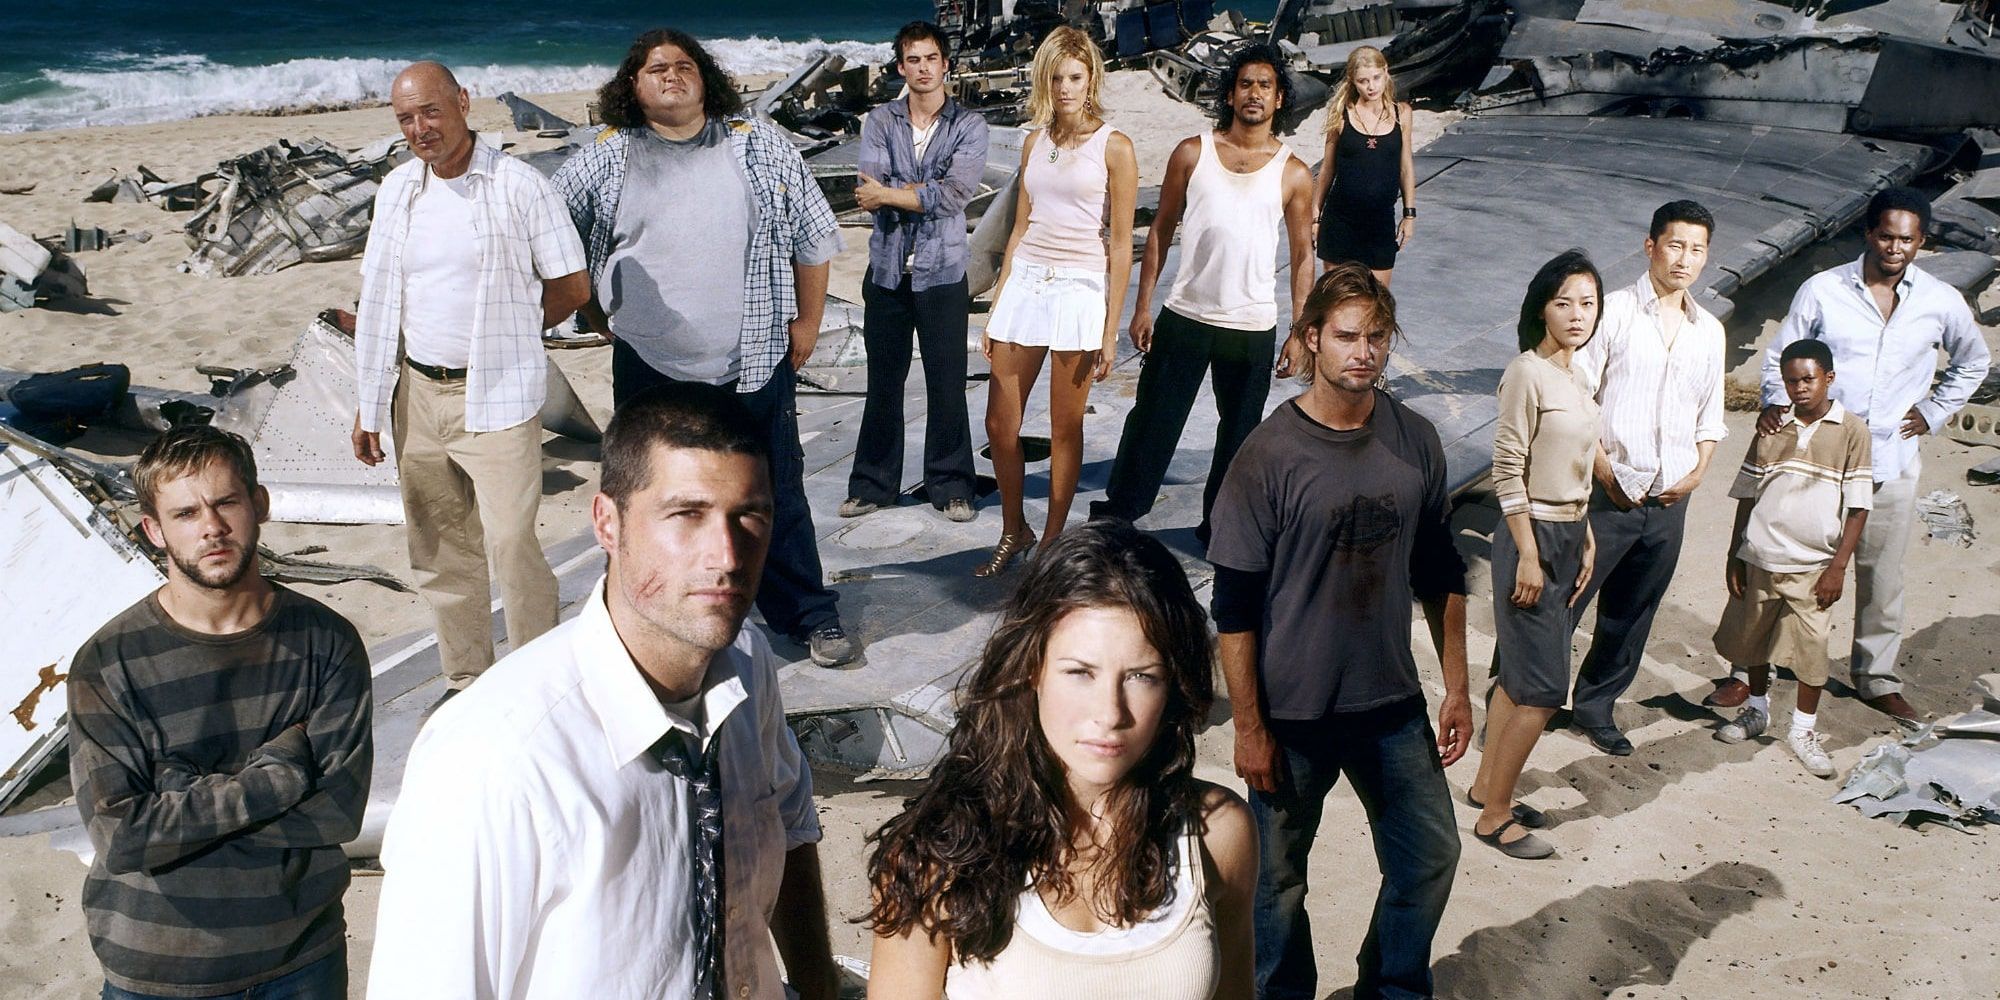 The Lost show cast posing for a photo.